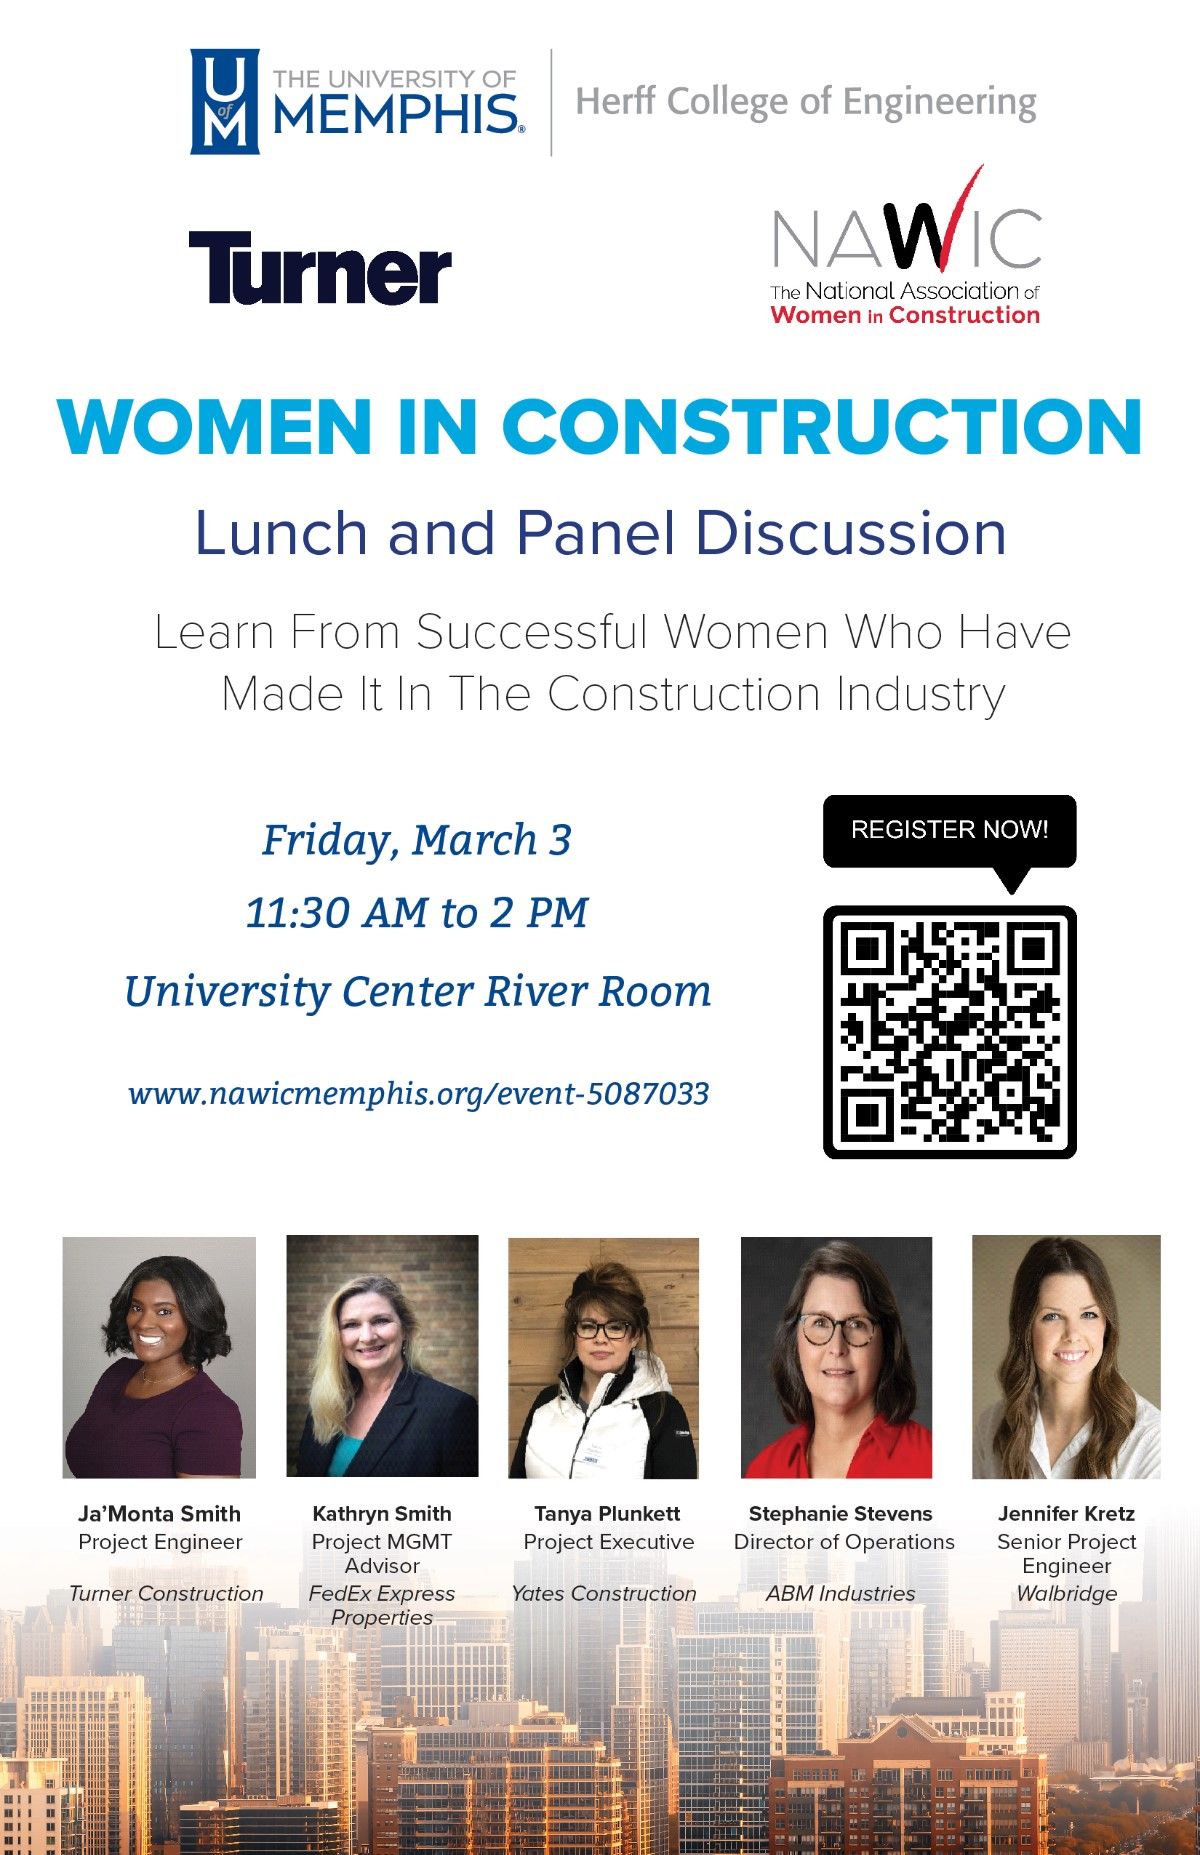 Women in Construction at the University of Memphis